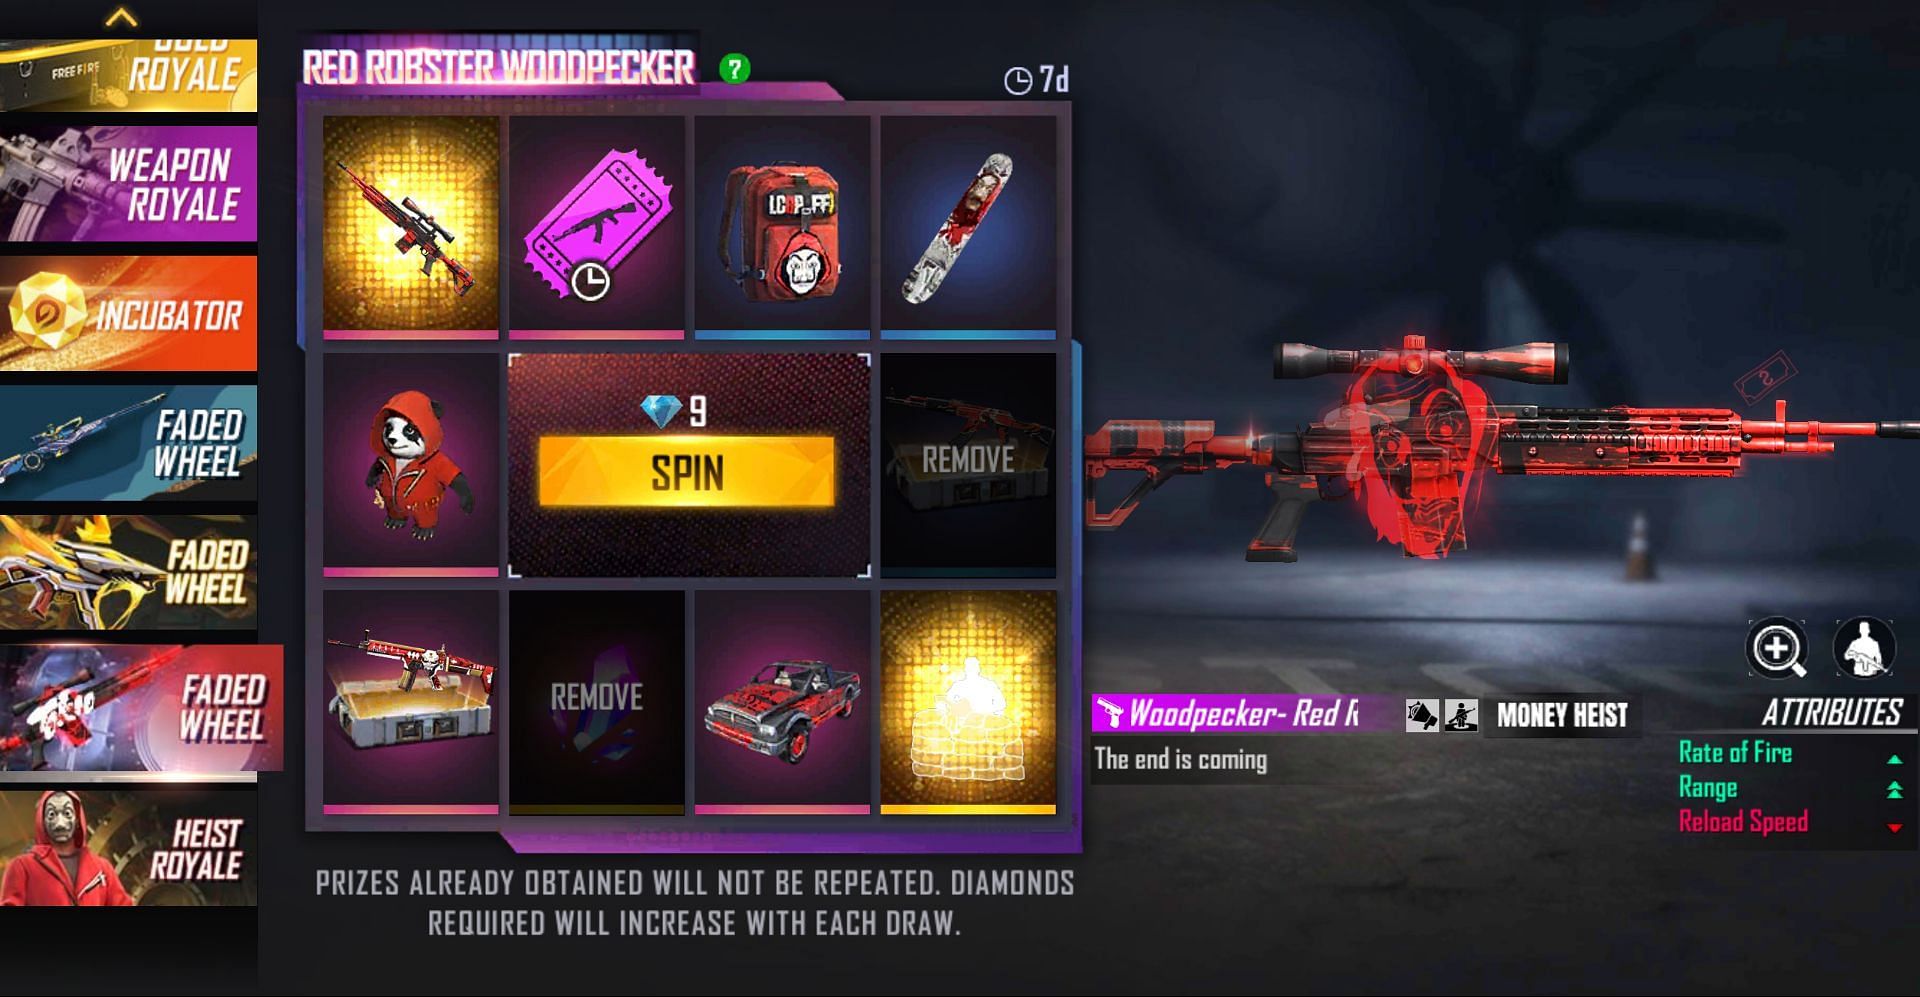 You can make the spins after removing the items (Image via Free Fire)